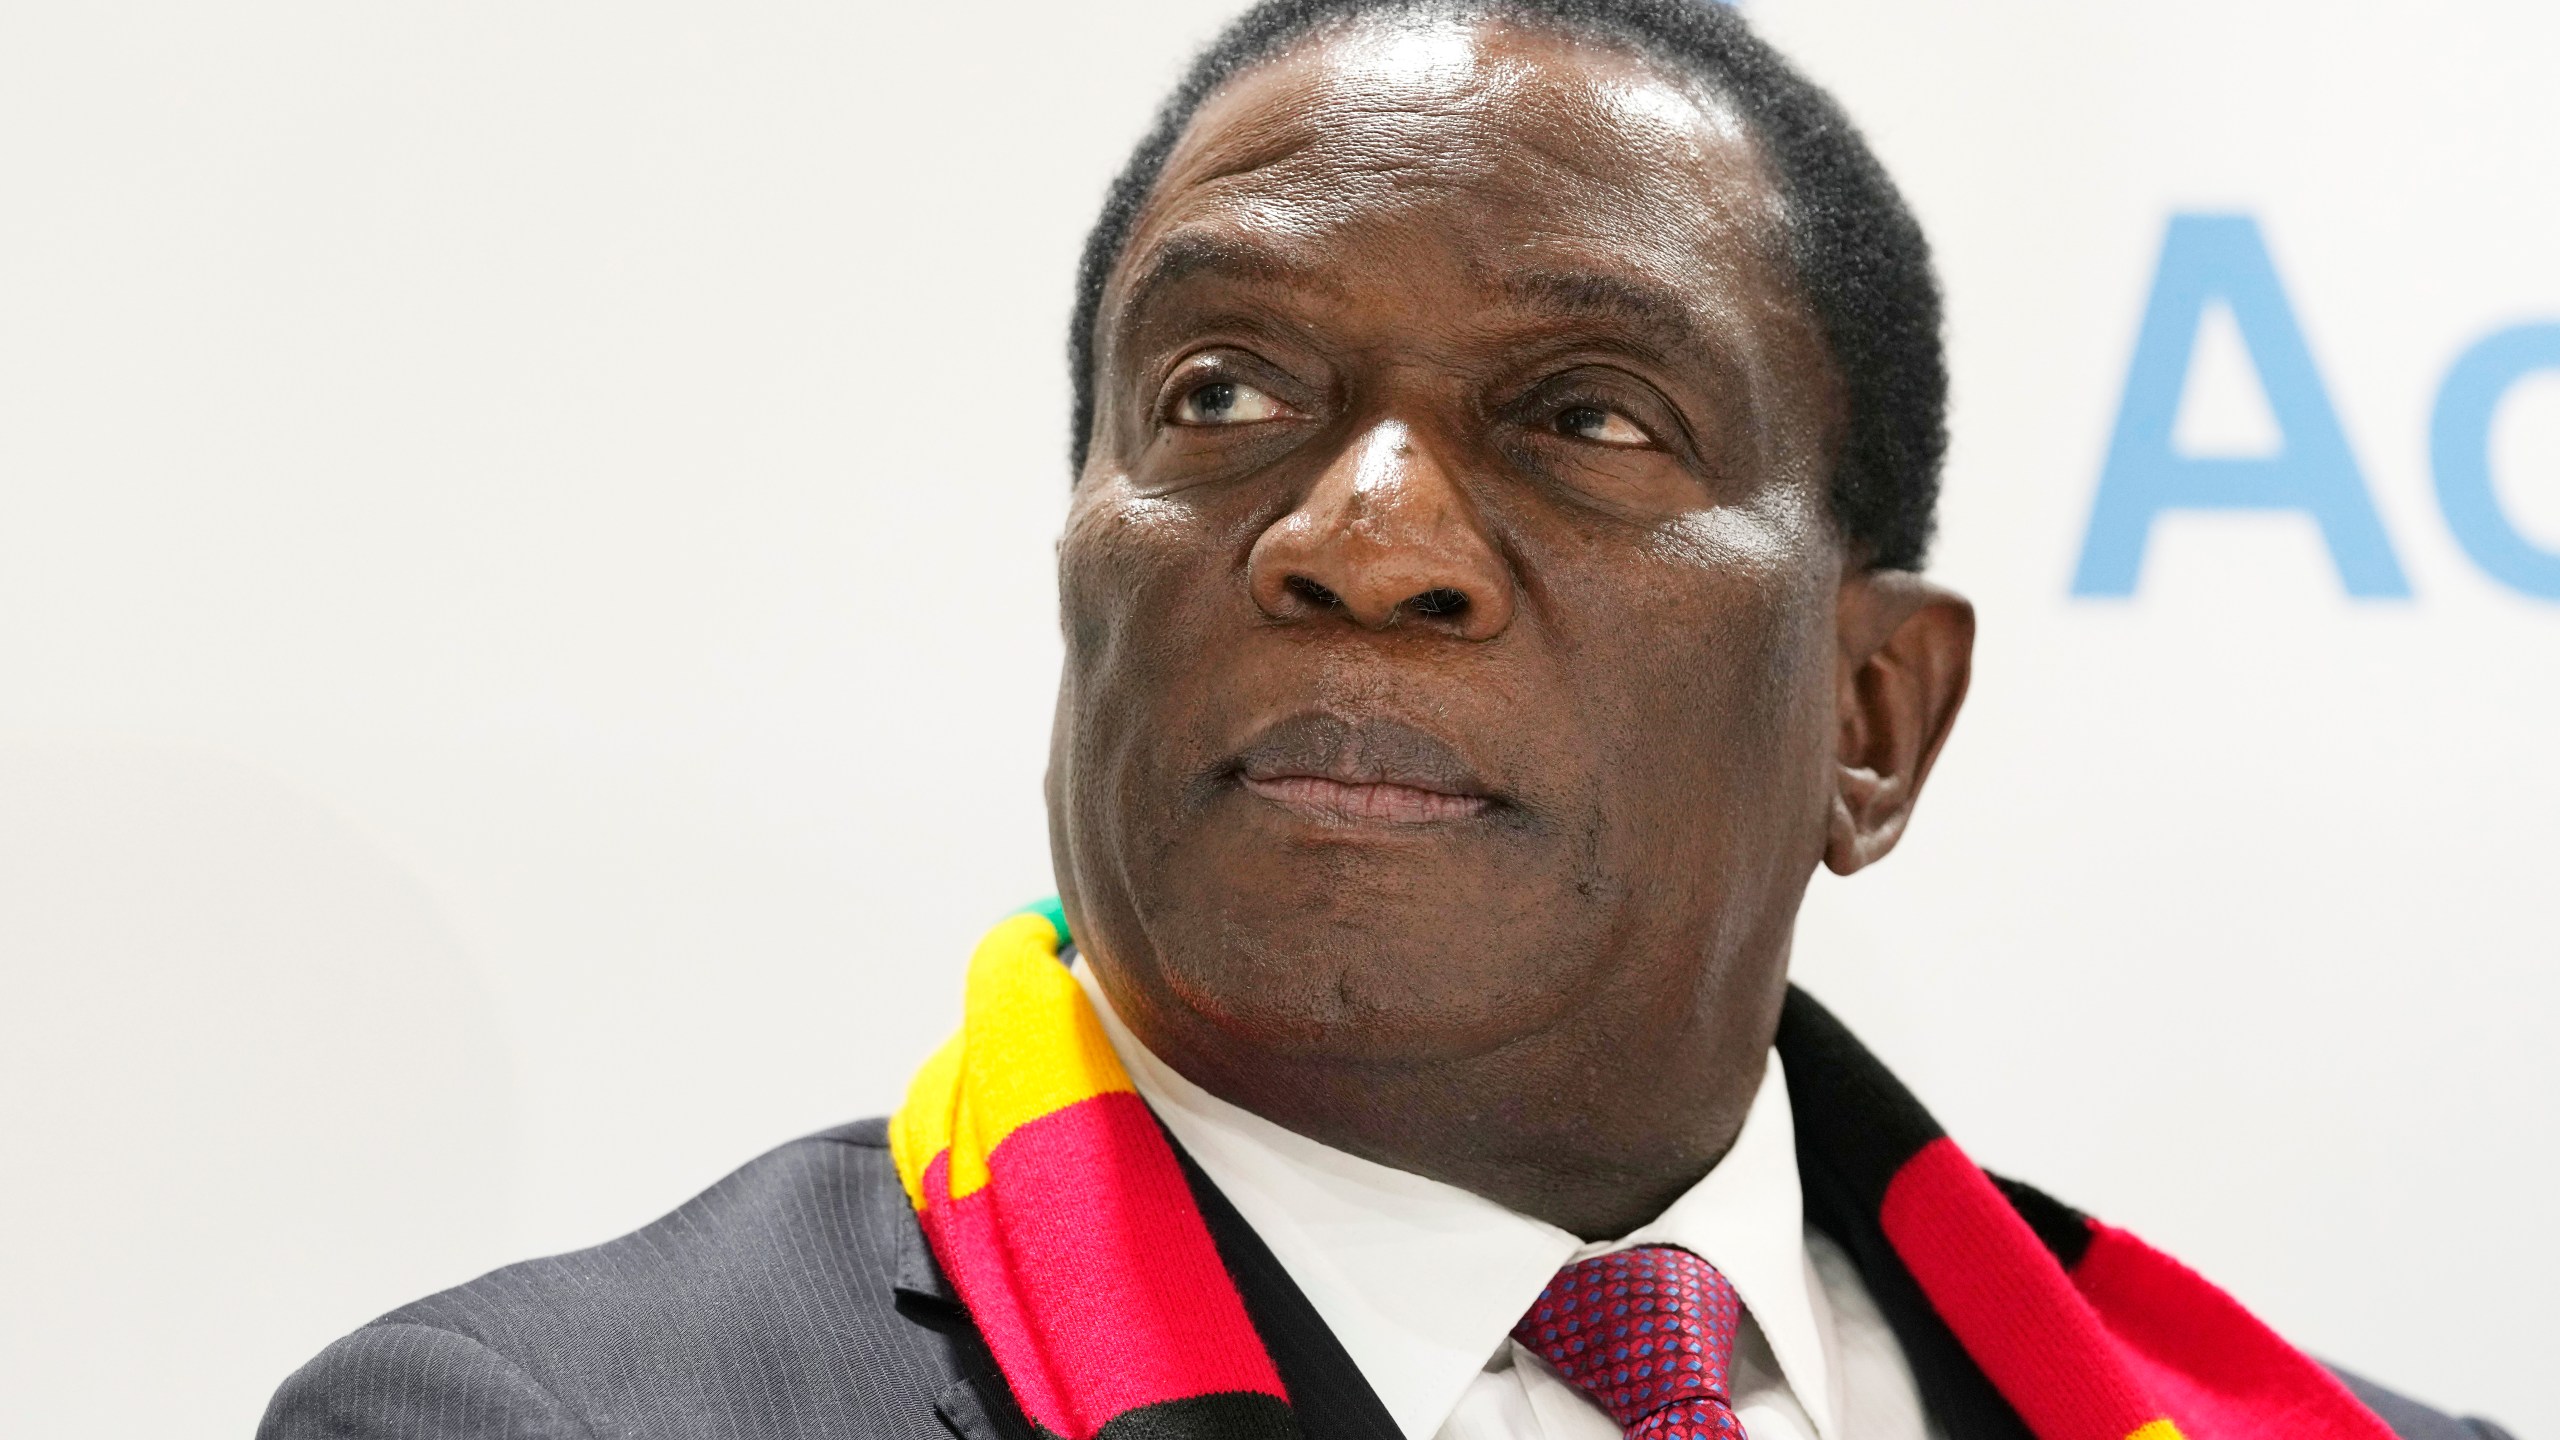 FILE - Zimbabwe's President Emmerson Mnangagwa attends a session at the Africa Pavilion at the COP27 U.N. Climate Summit, Nov. 7, 2022, in Sharm el-Sheikh, Egypt. The United States has sanctioned Zimbabwe’s President Emmerson Mnangagwa, the First Lady and other government officials for their alleged involvement in corruption and human rights abuses. Treasury’s Office of Foreign Assets Control imposed sanctions on three entities and eleven people, including the Mnangagwas, Vice President Constantino Chiwenga, and retired Brigadier General Walter Tapfumaneyi, among others. (AP Photo/Peter Dejong, File)